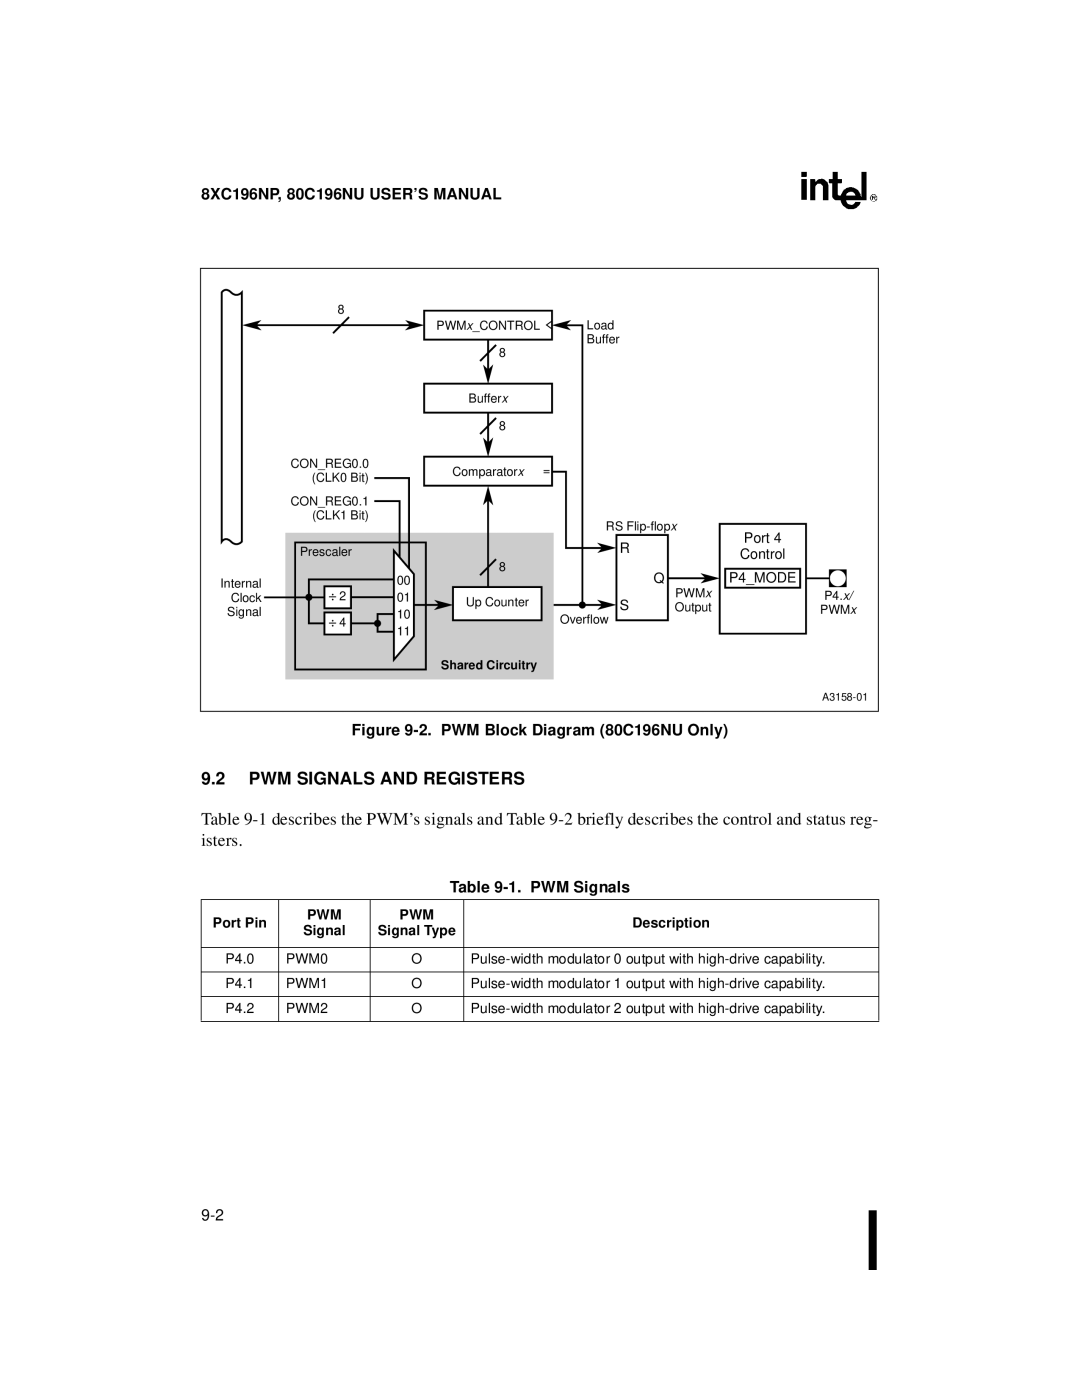 Intel 8XC196NP, 80C196NU, Microcontroller manual PWM Signals and Registers 